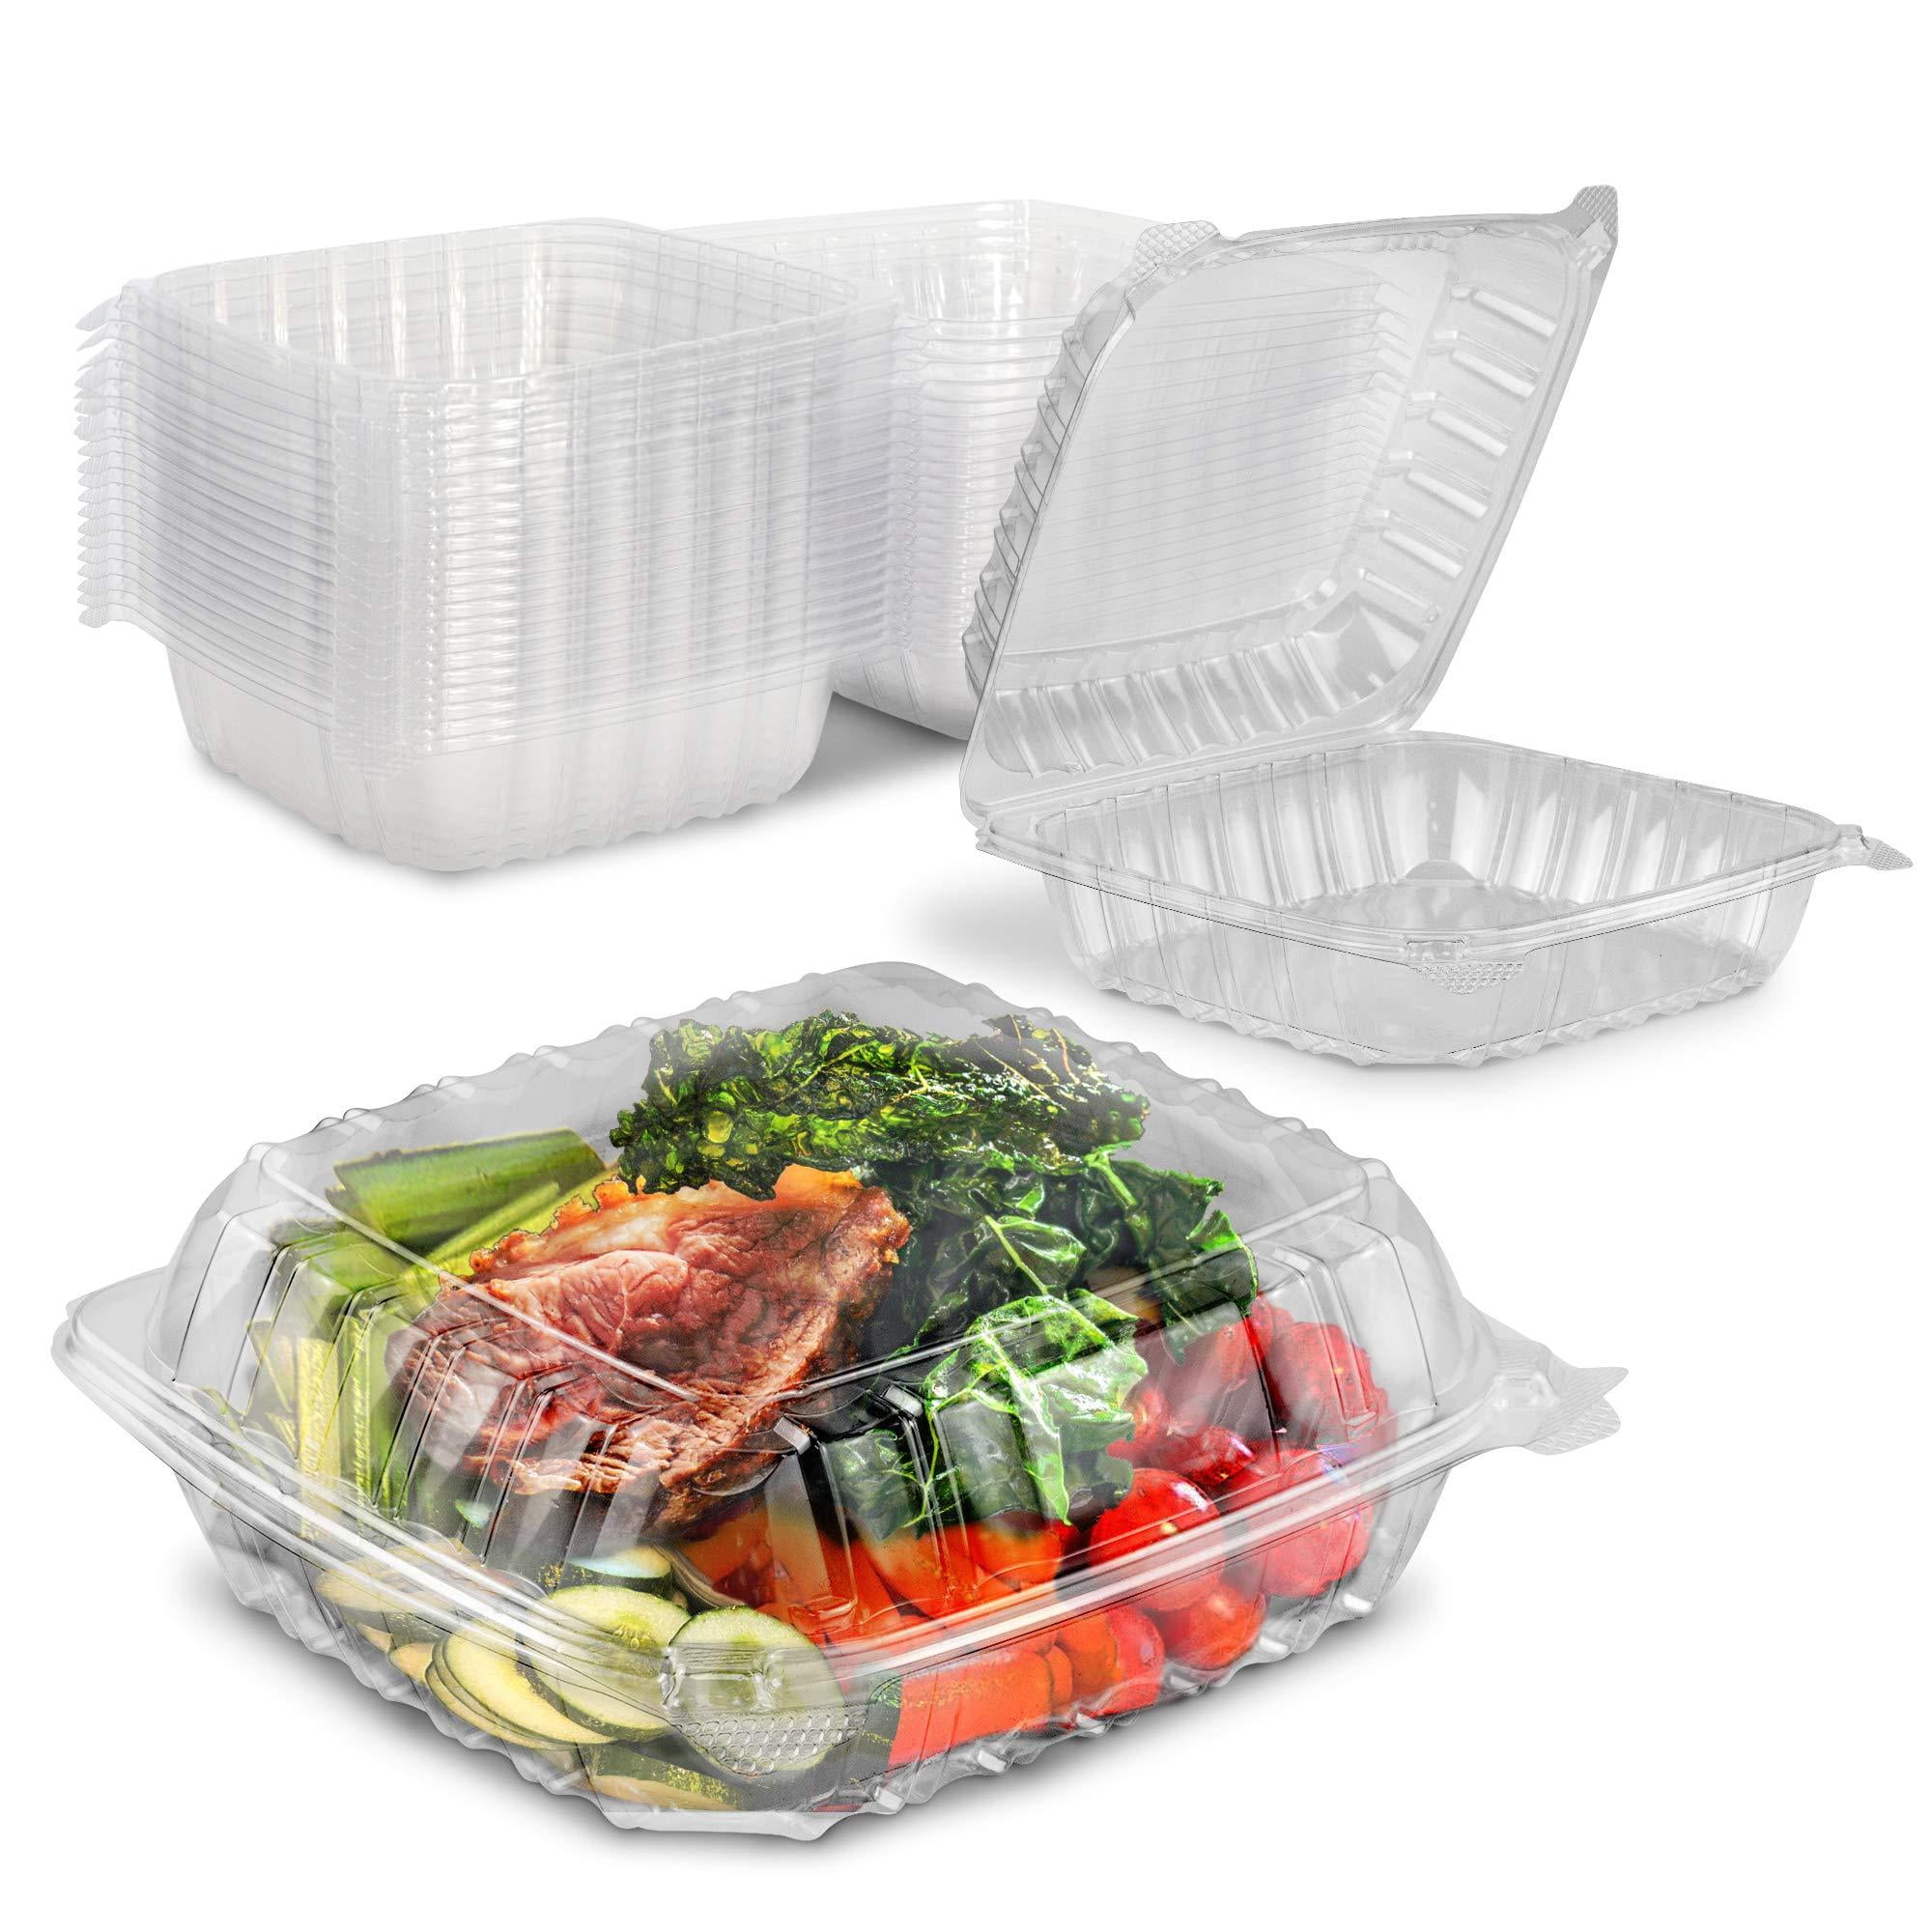 Enterprise Technology Solutions Clamshell Hinged Lid Togo Food Containers